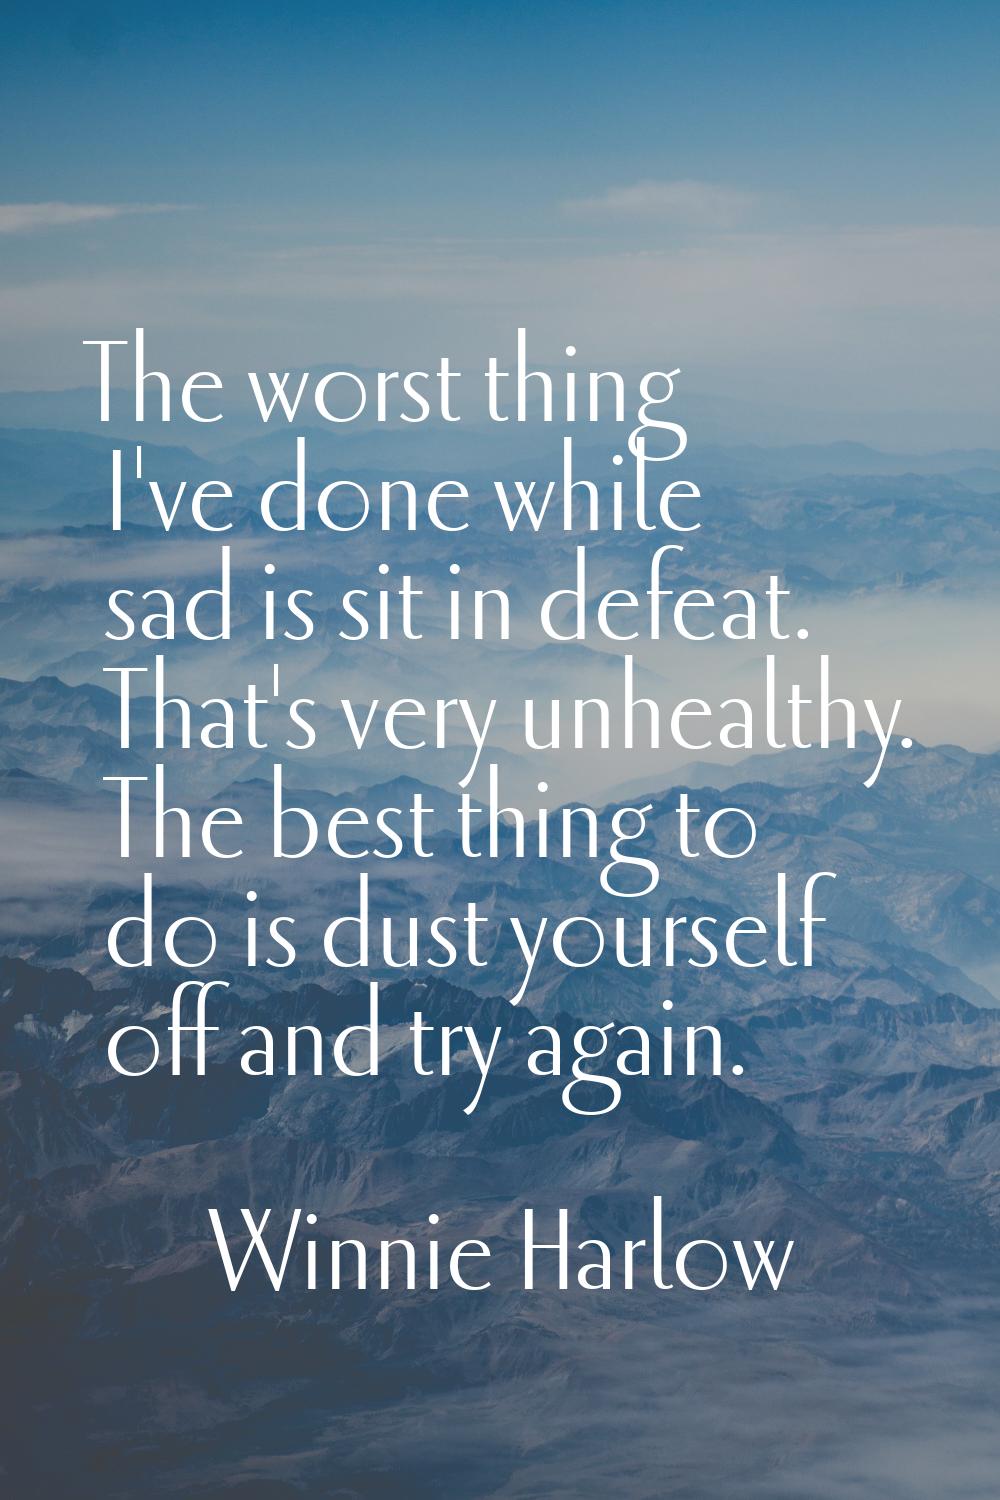 The worst thing I've done while sad is sit in defeat. That's very unhealthy. The best thing to do i